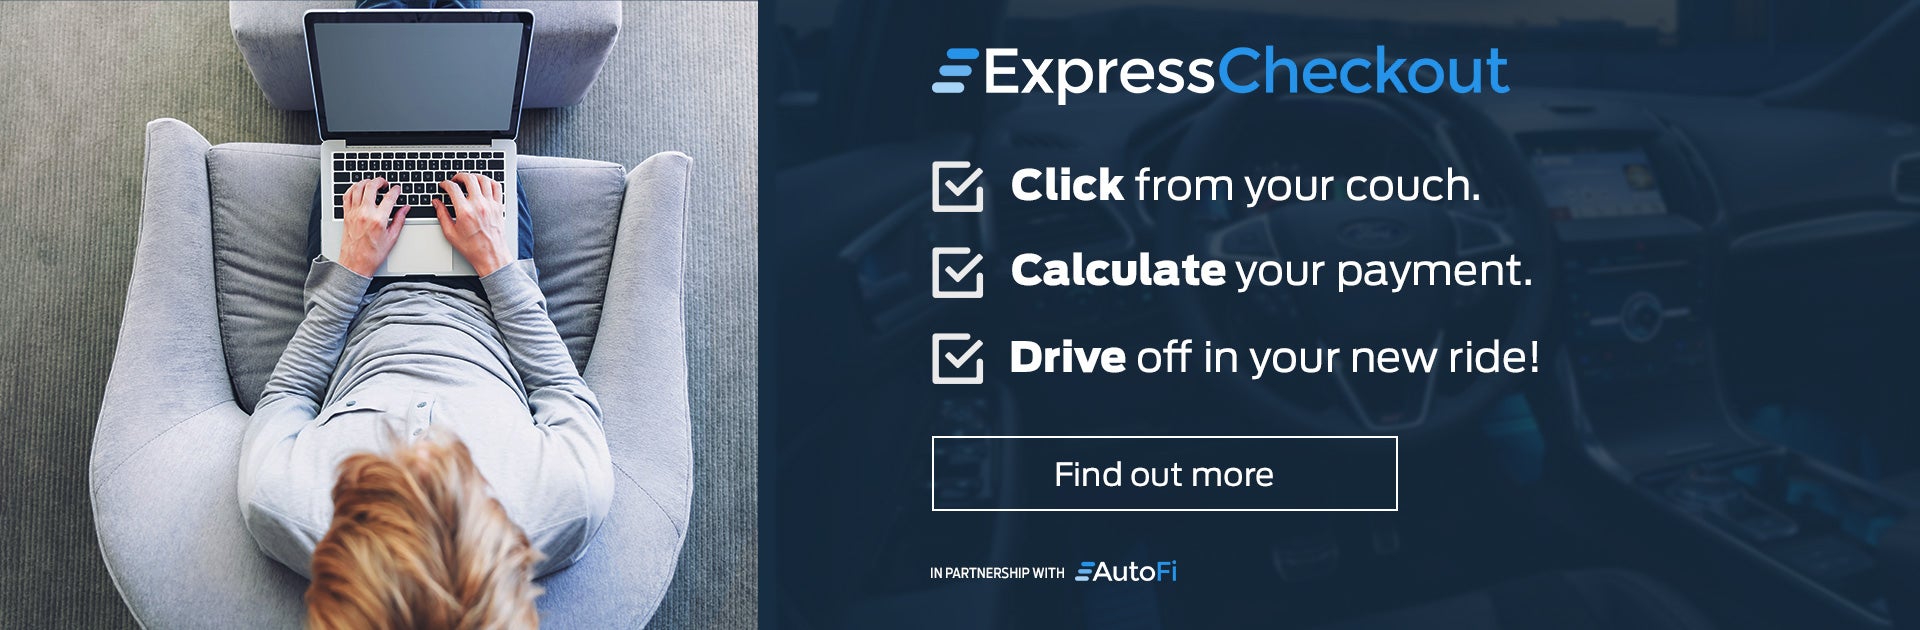 Buy Your New Car 100% Online - Express Checkout